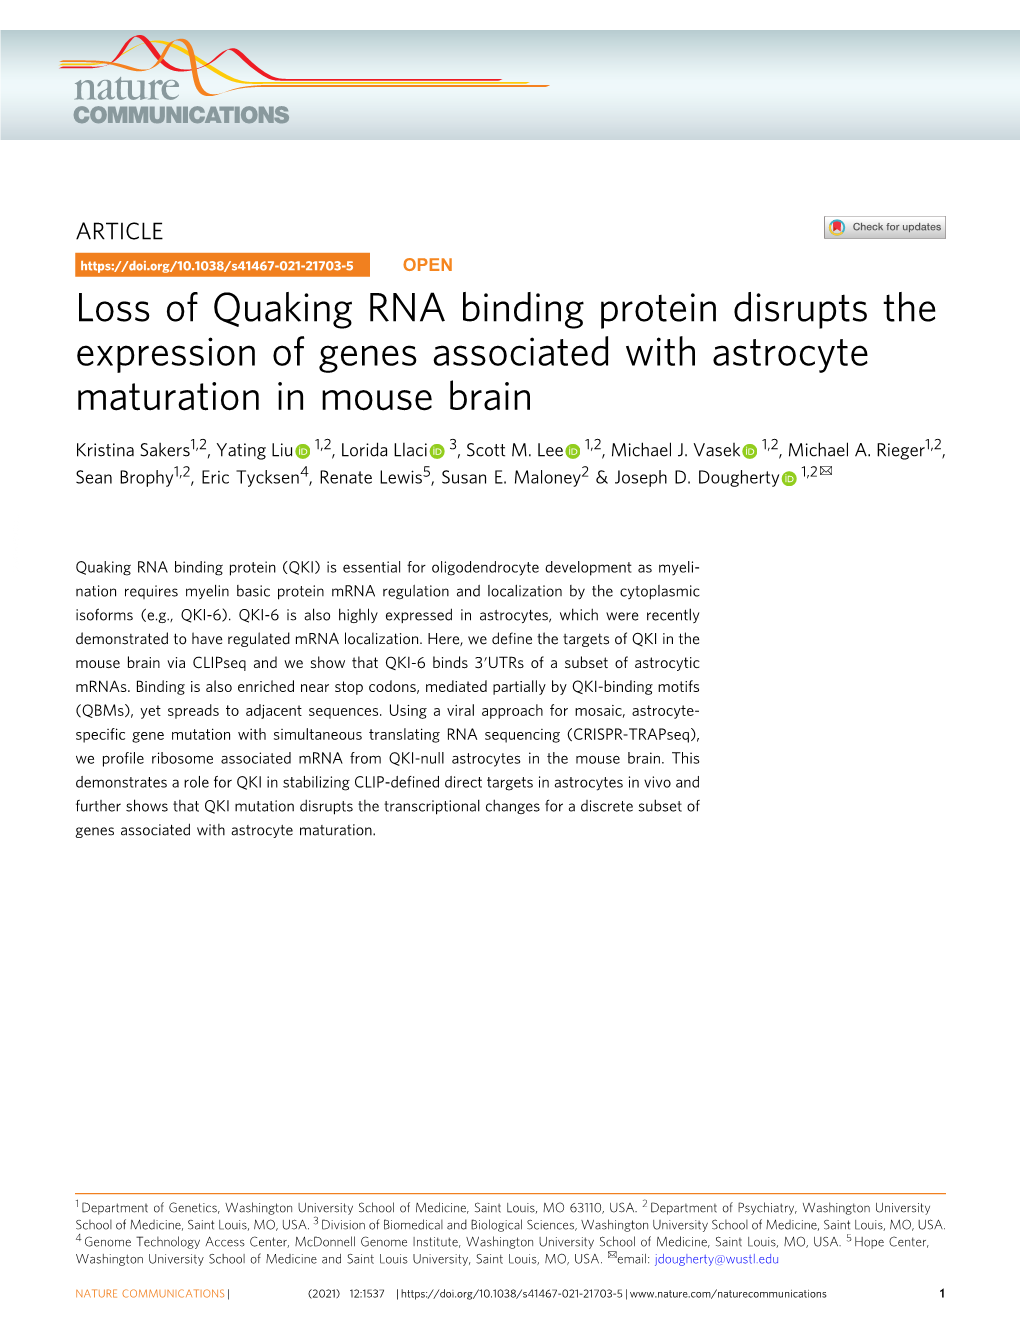 Loss of Quaking RNA Binding Protein Disrupts the Expression of Genes Associated with Astrocyte Maturation in Mouse Brain